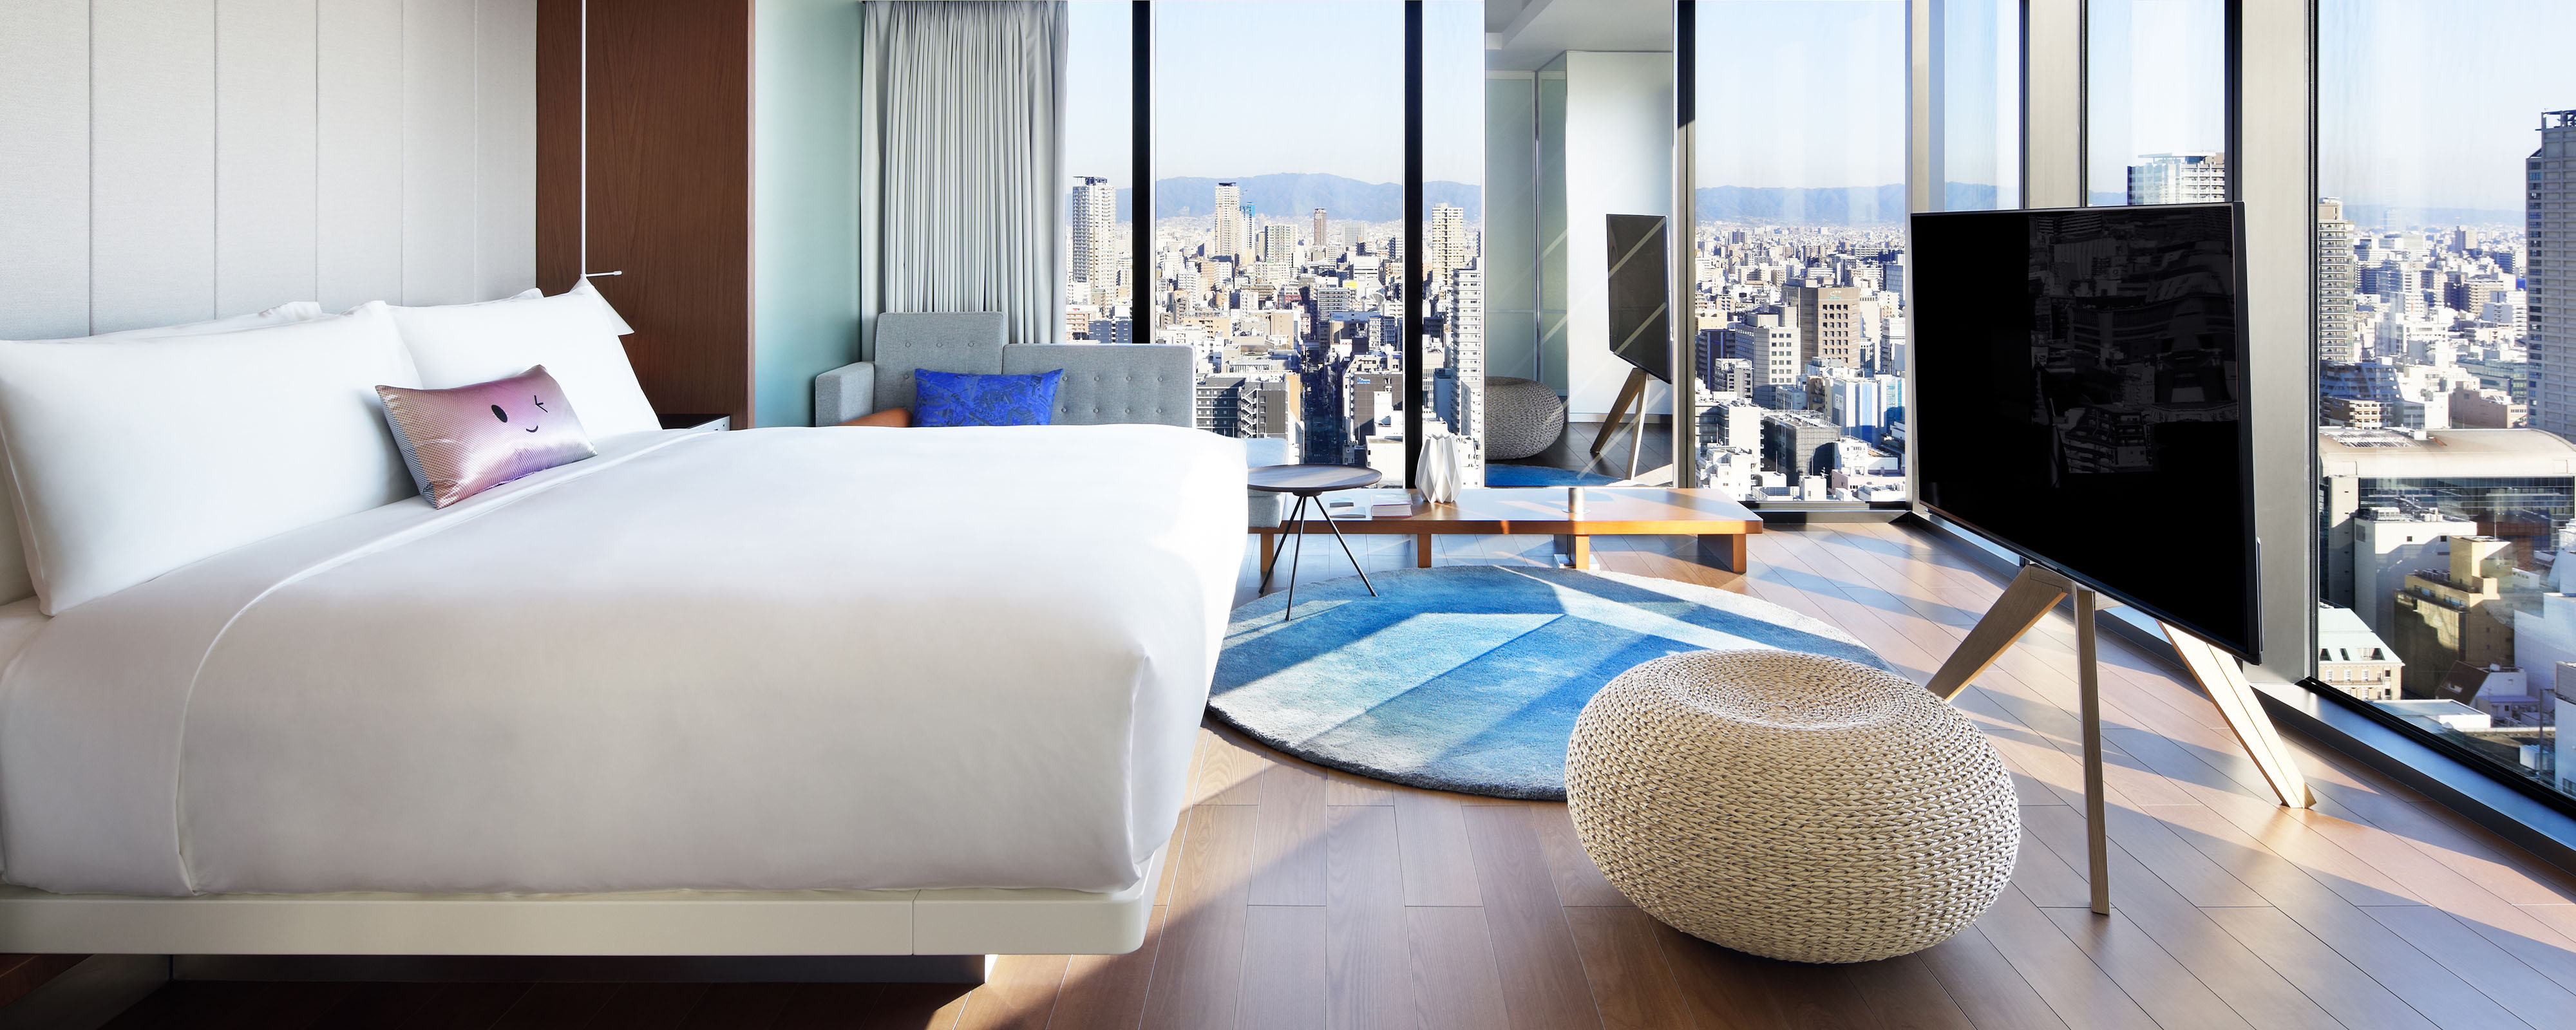 Stay longer, Experience More in Osaka, Japan | W Hotels